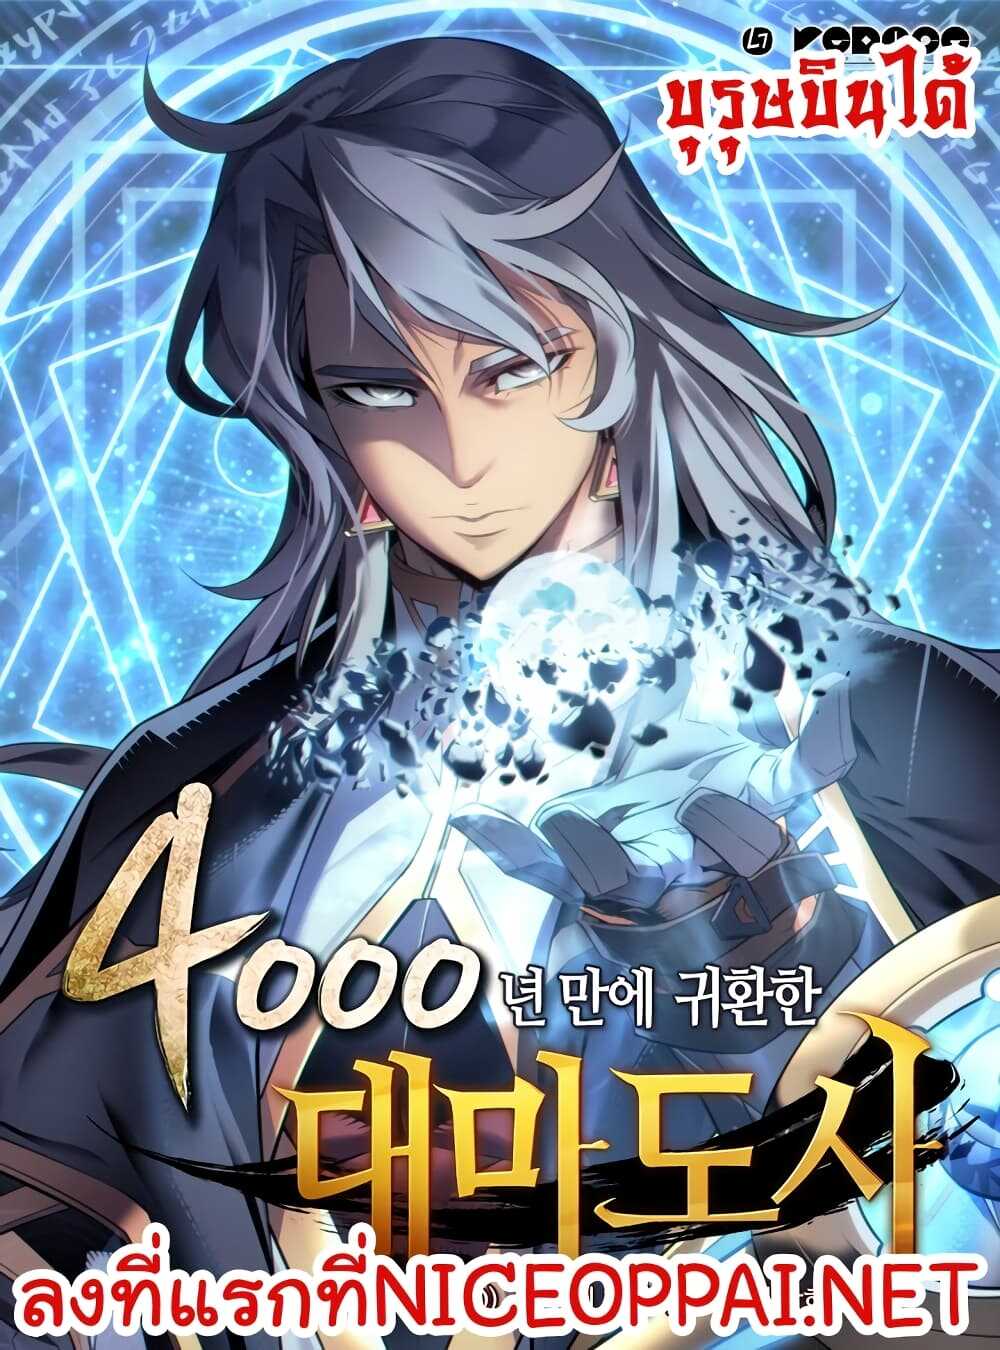 The Great Mage Returns After 4000 Years 24 (1)